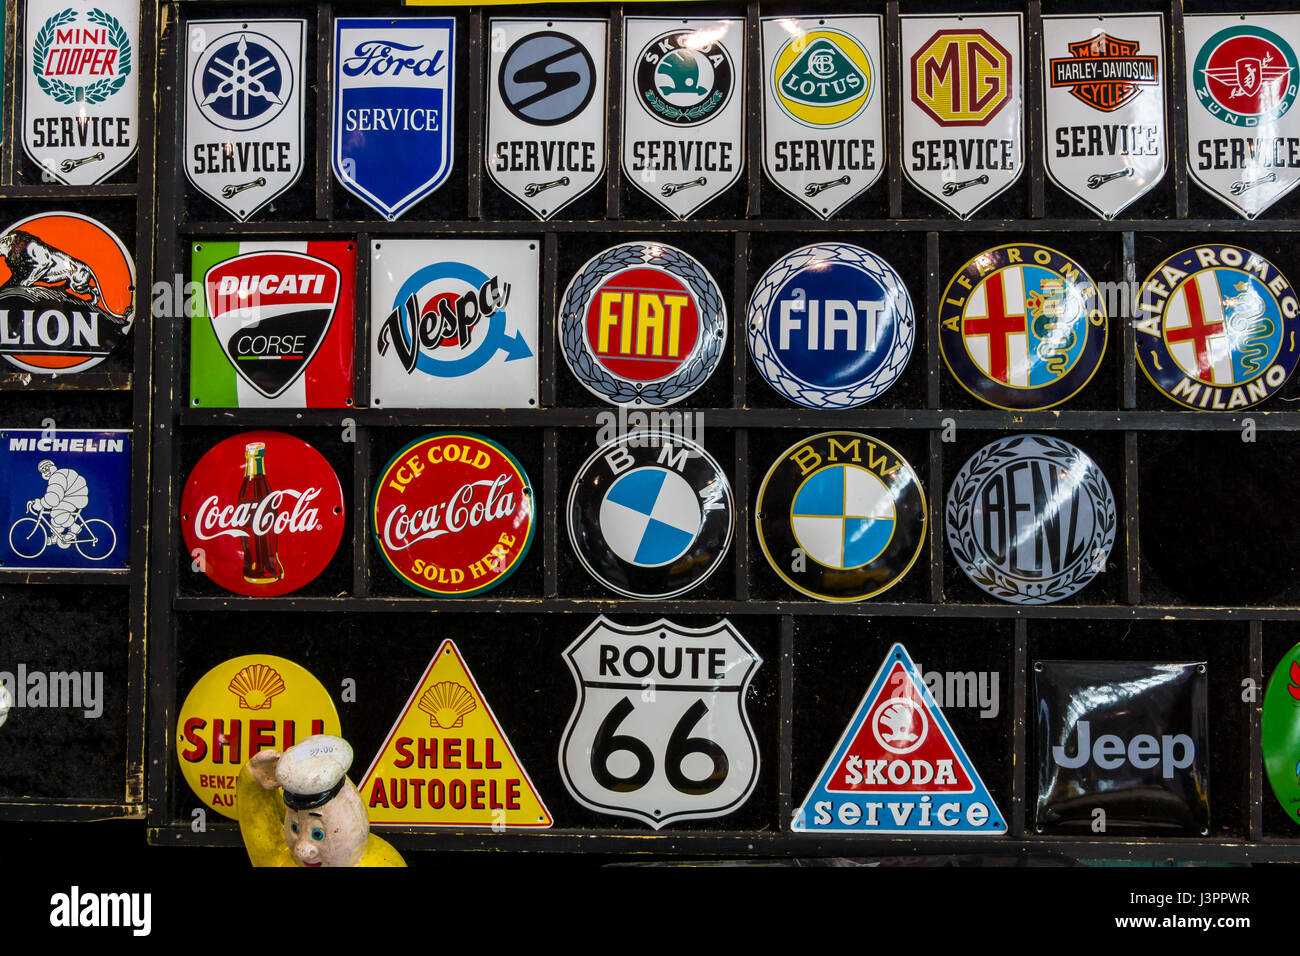 STUTTGART, GERMANY - MARCH 03, 2017: Souvenir magnets with logos of famous automotive brands, oil companies and beverage producers. Europe's greatest classic car exhibition 'RETRO CLASSICS' Stock Photo